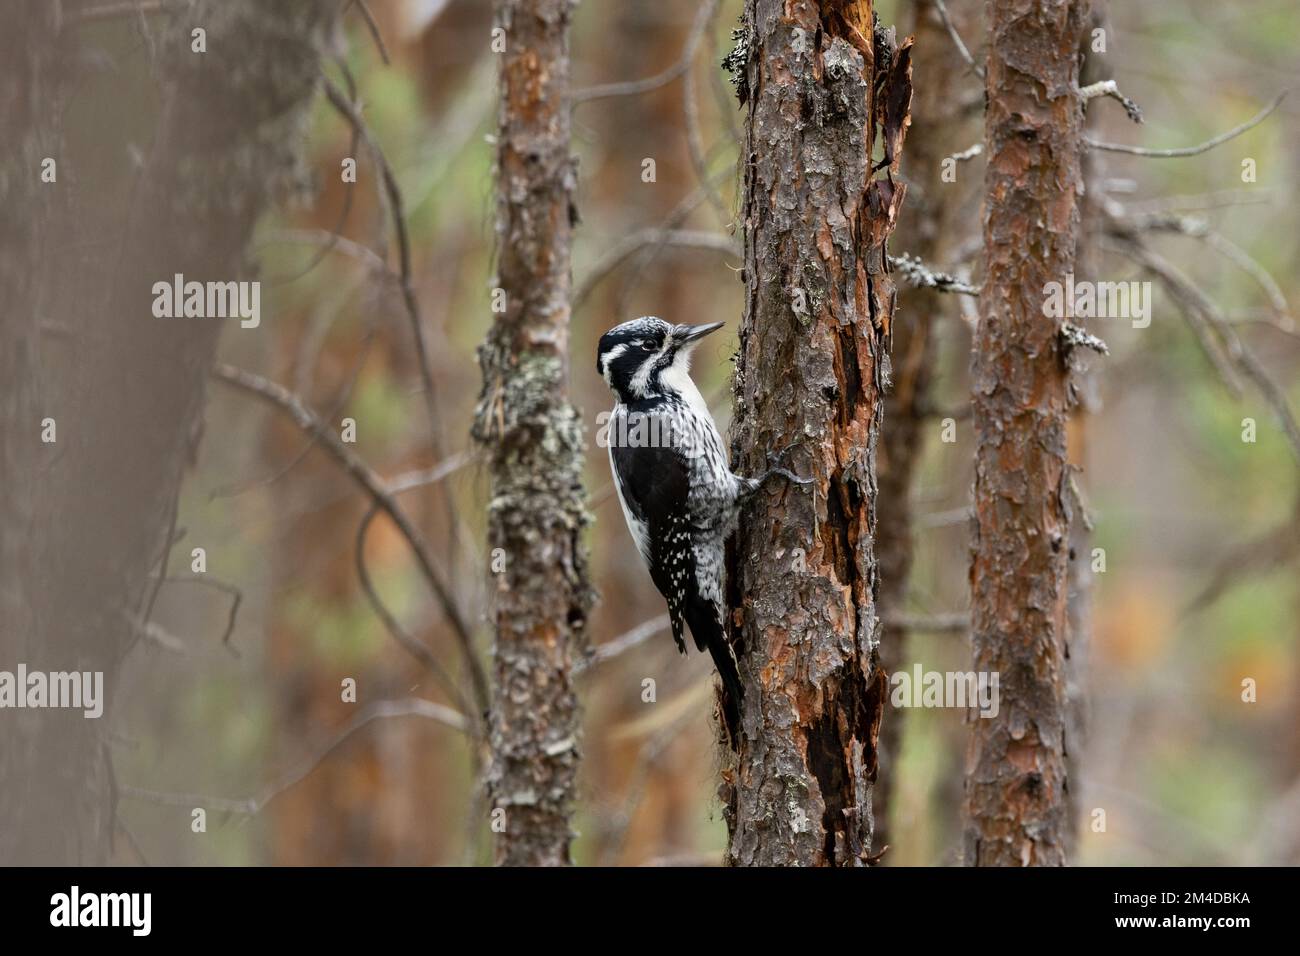 A female Three-toed woodpecker perched on a Pine tree in a forest in Oulanka National Park, Northern Finland Stock Photo